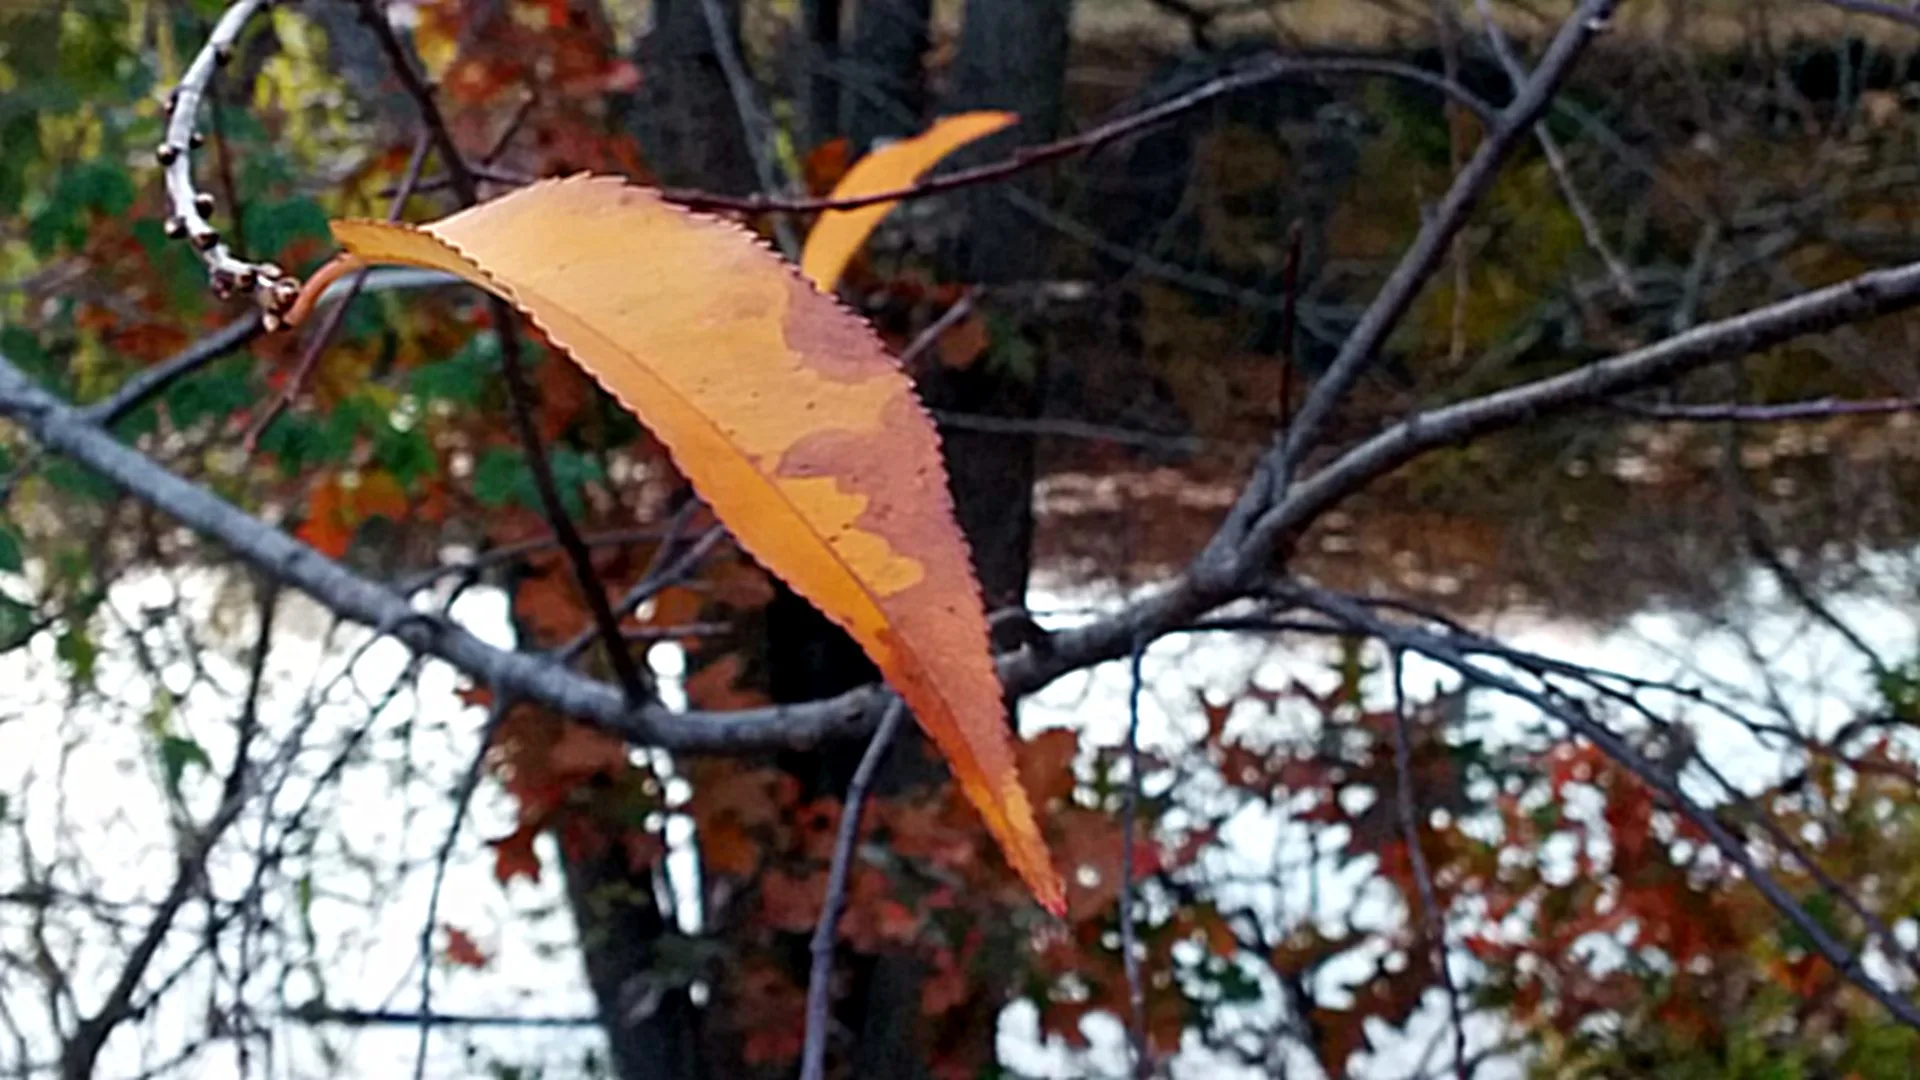 Close-up of a thin yellow leaf arching from a curved branch. The narrow depth of field has only the branch and the leaf in focus. In the background are branches without leaves. Another similar leaf can be seen beyond the one in the foreground. Farther in the distance is a body of water. Photo taken in the low light a little before dusk.